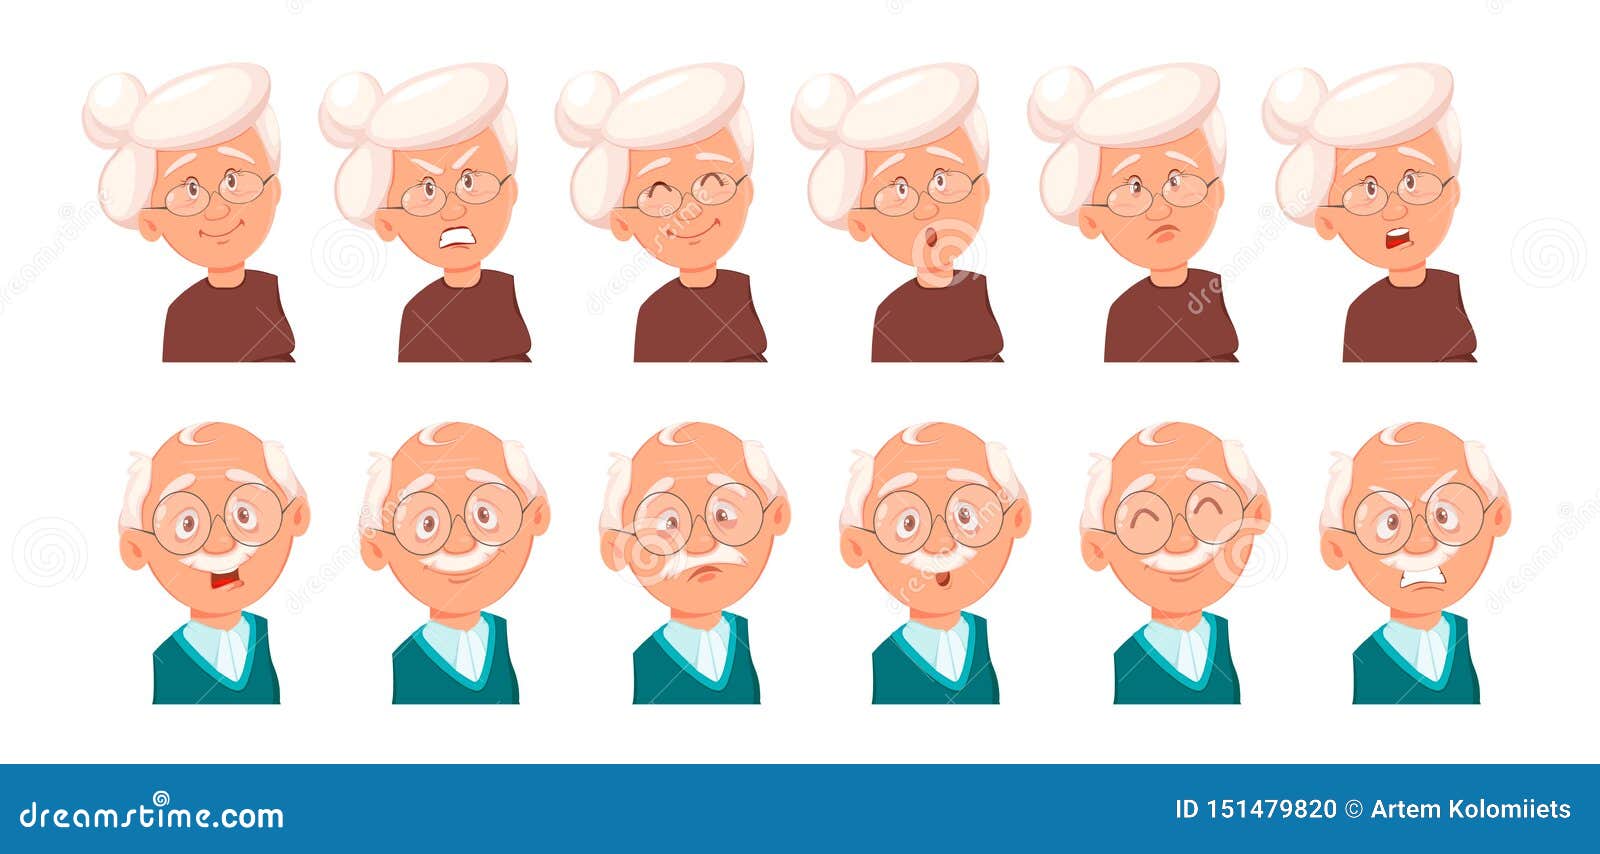 face expressions of grandfather and grandmother